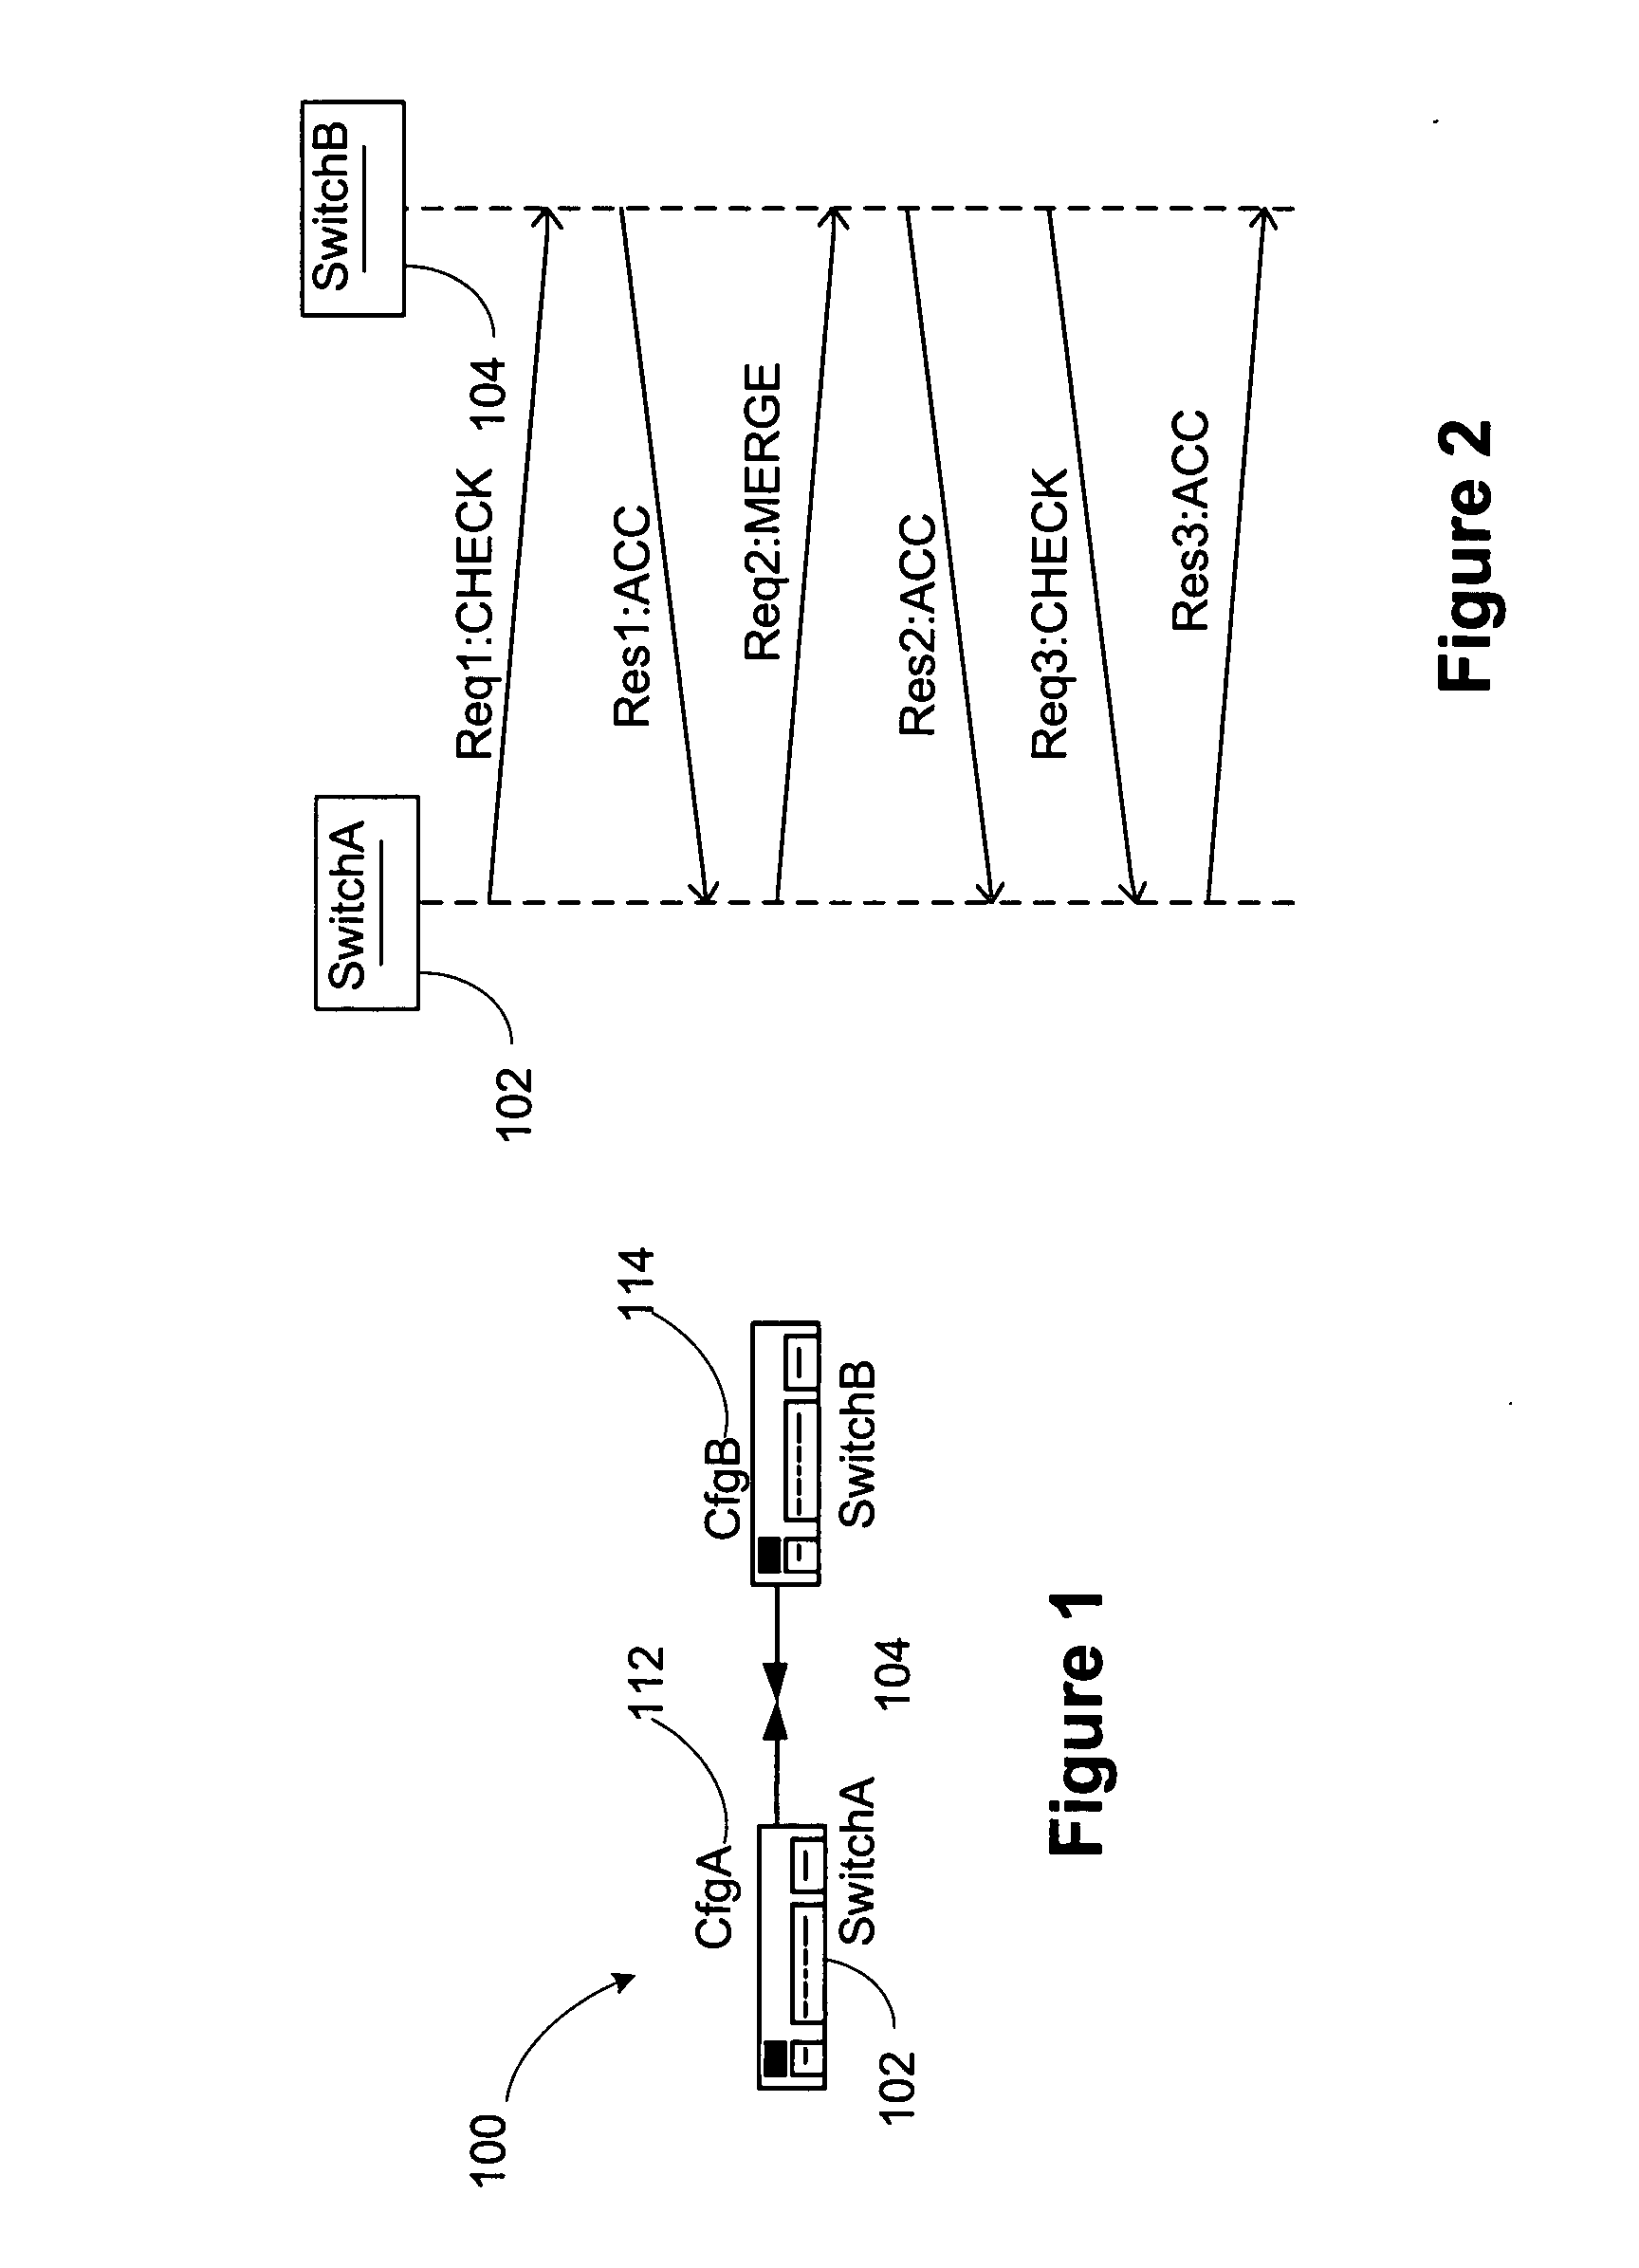 Methods, devices and systems with improved zone merge operation by operating on a switch basis